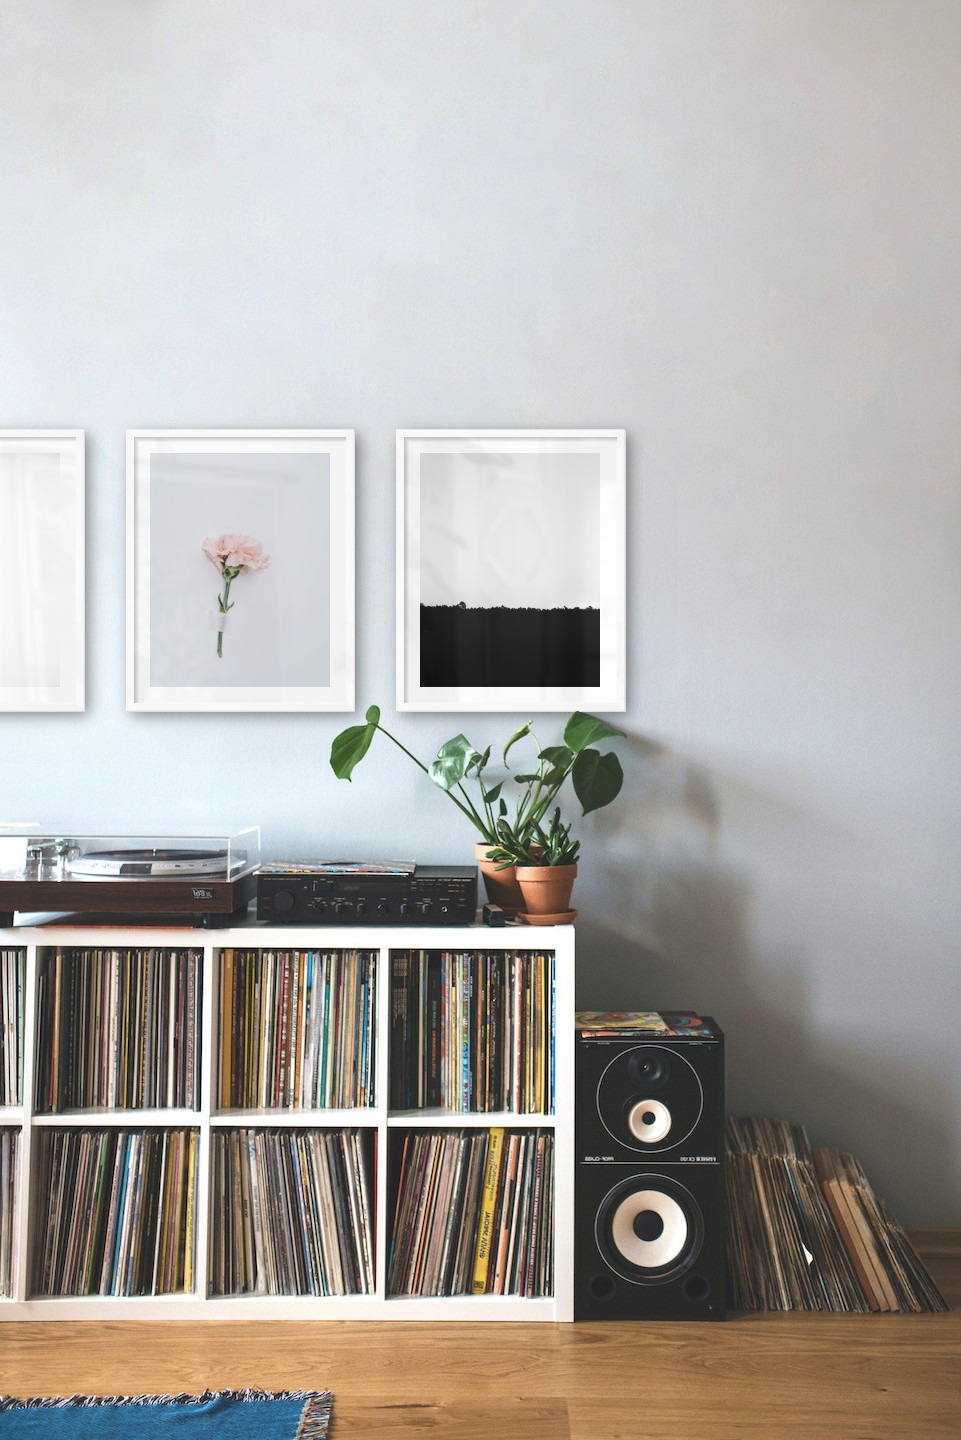 Gallery wall with picture frames in white in sizes 40x50 with prints "Foggy wooden tops from the side", "Pink flower" and "Sky above trees"